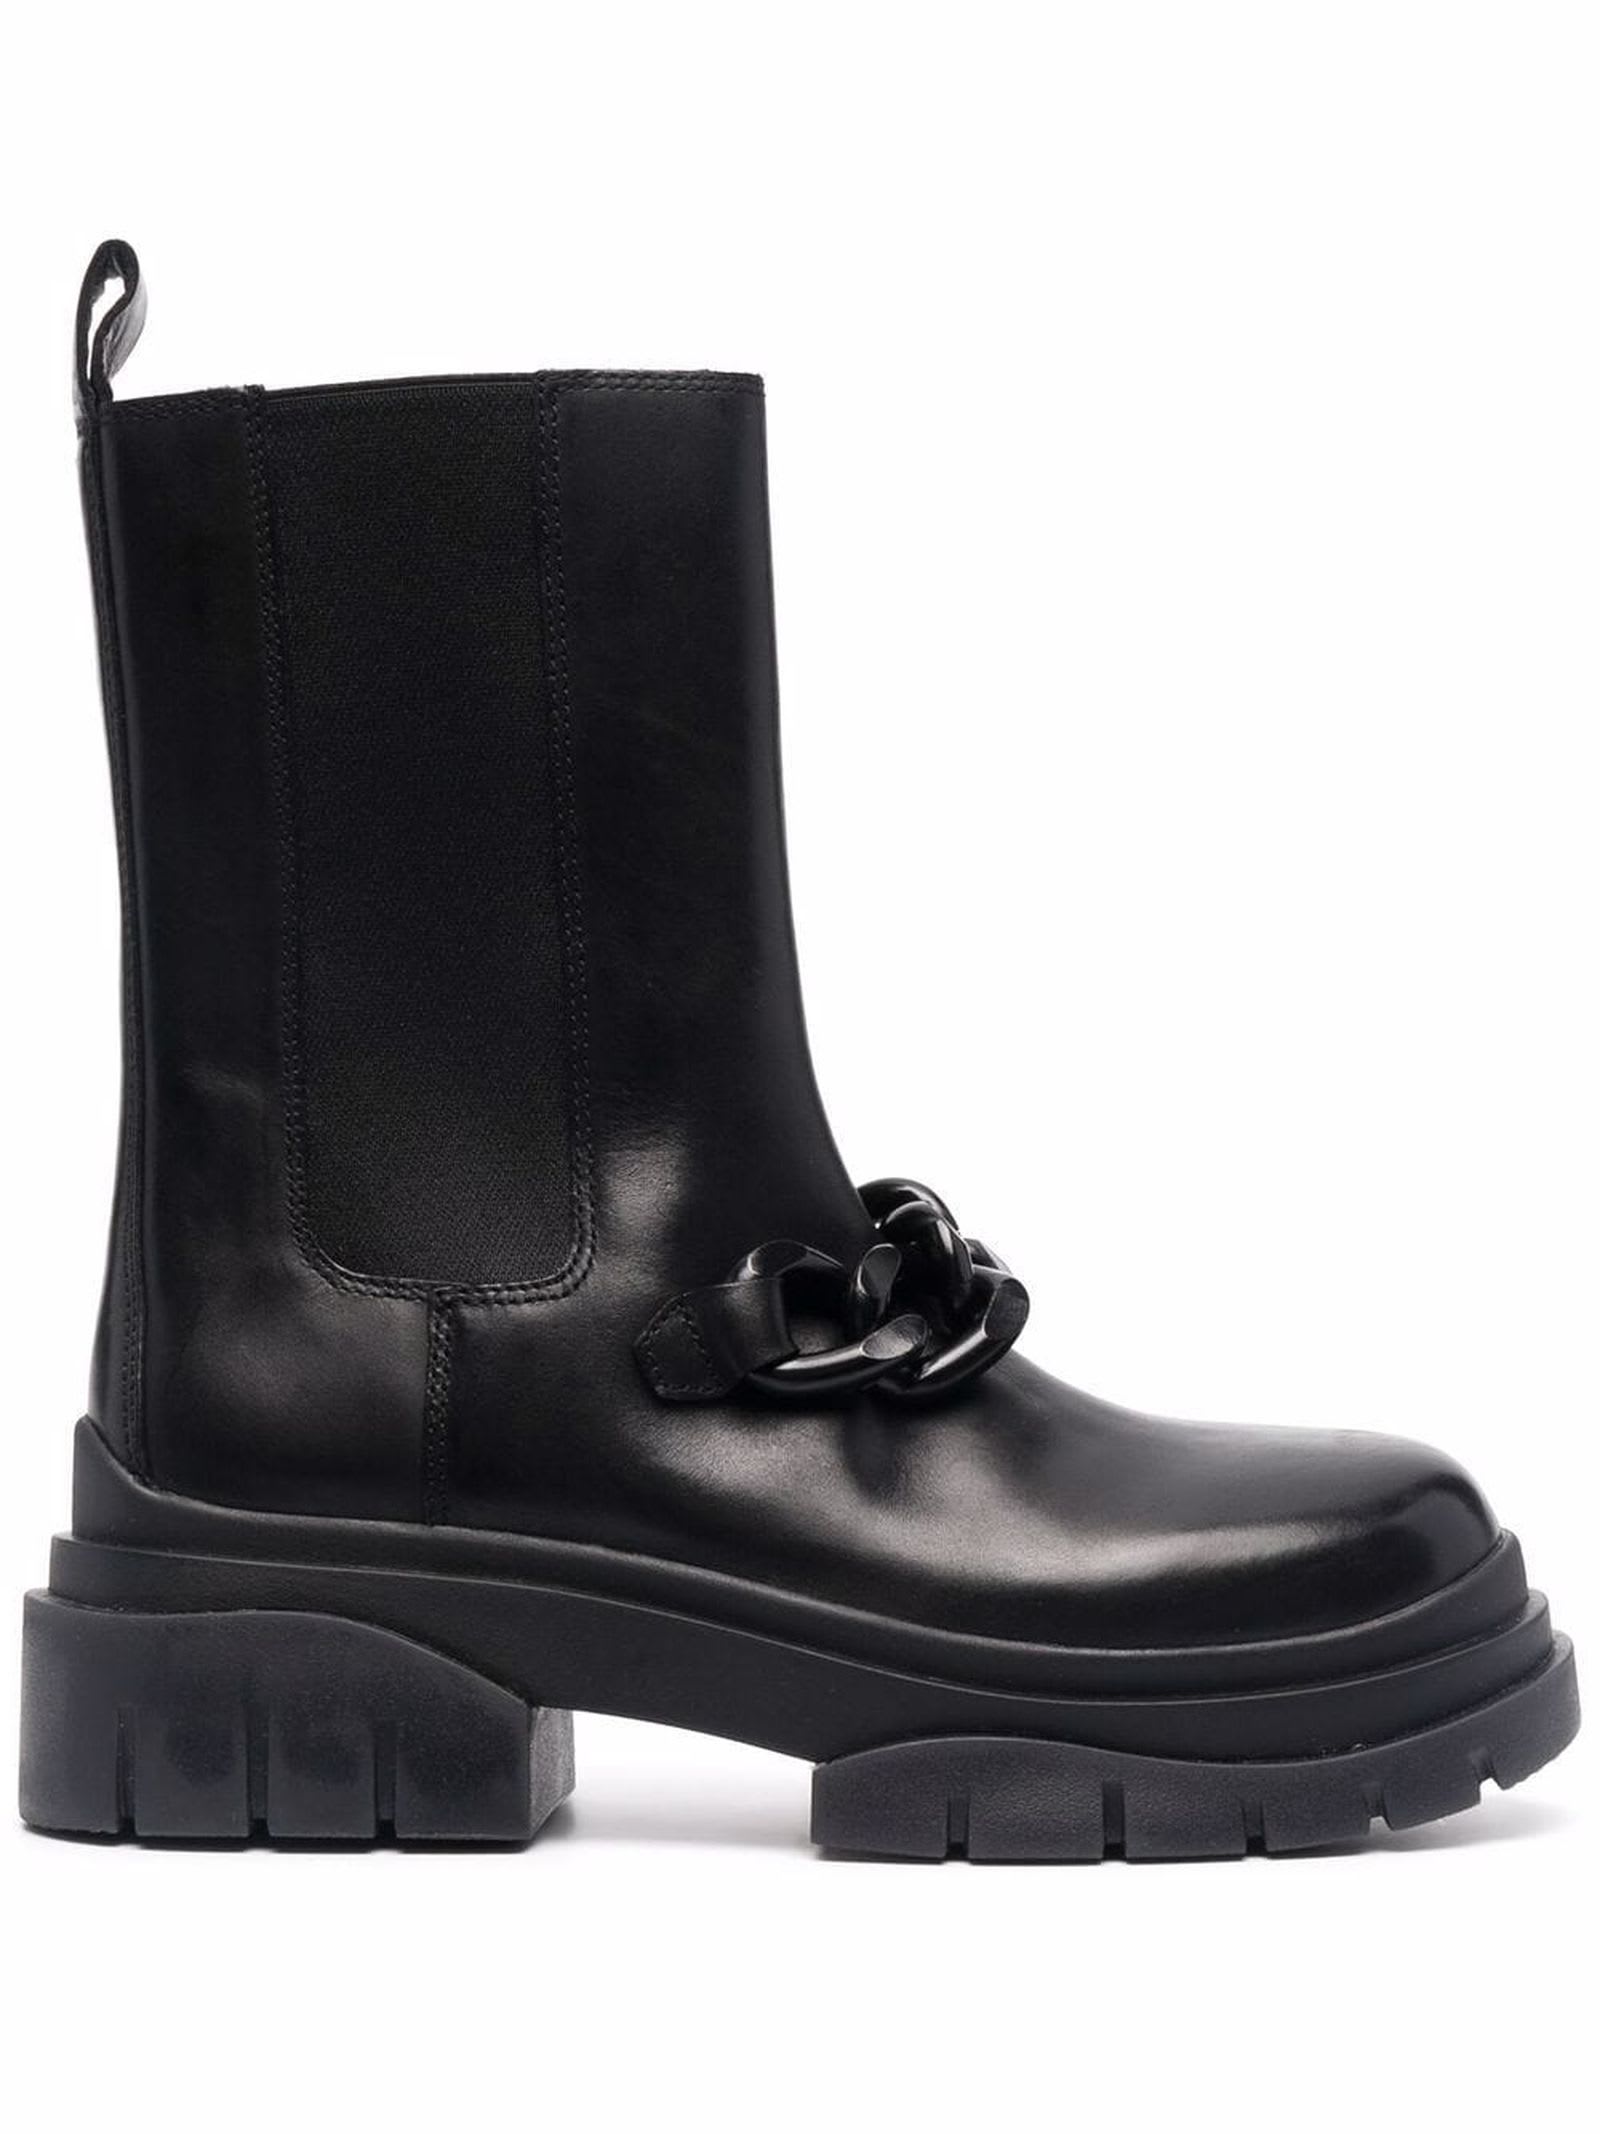 Ash Black Leather Storm Chain Ankle Boots